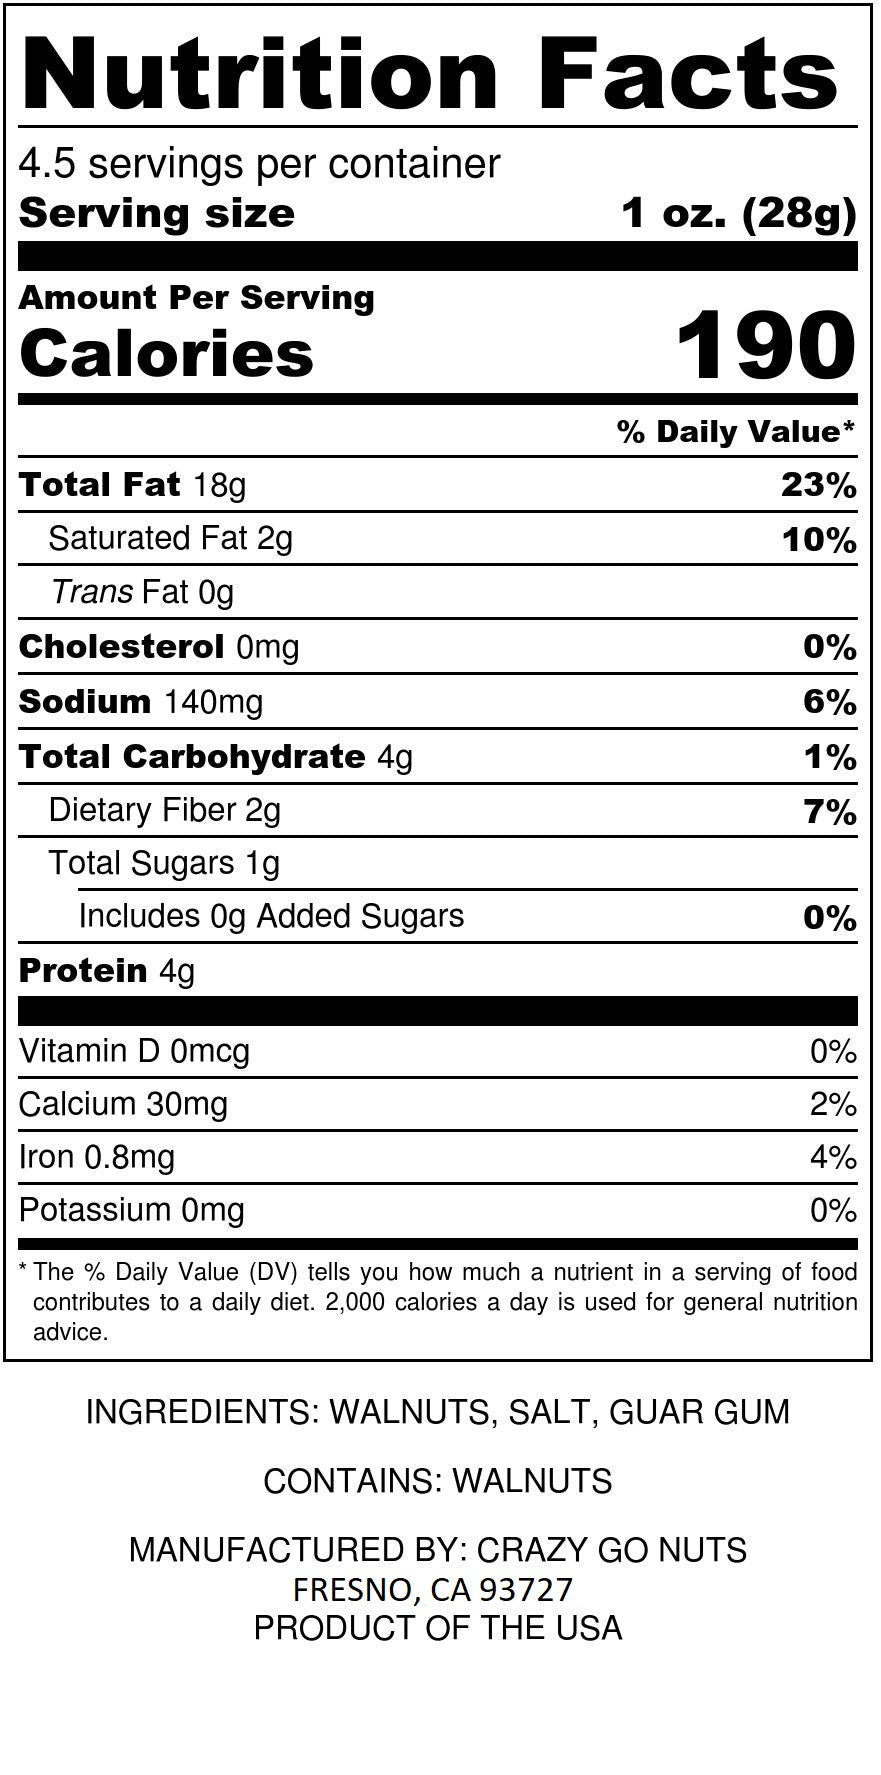 Nutrition panel for sea salt walnuts. Ingredients contain walnuts, salt, and guar gum